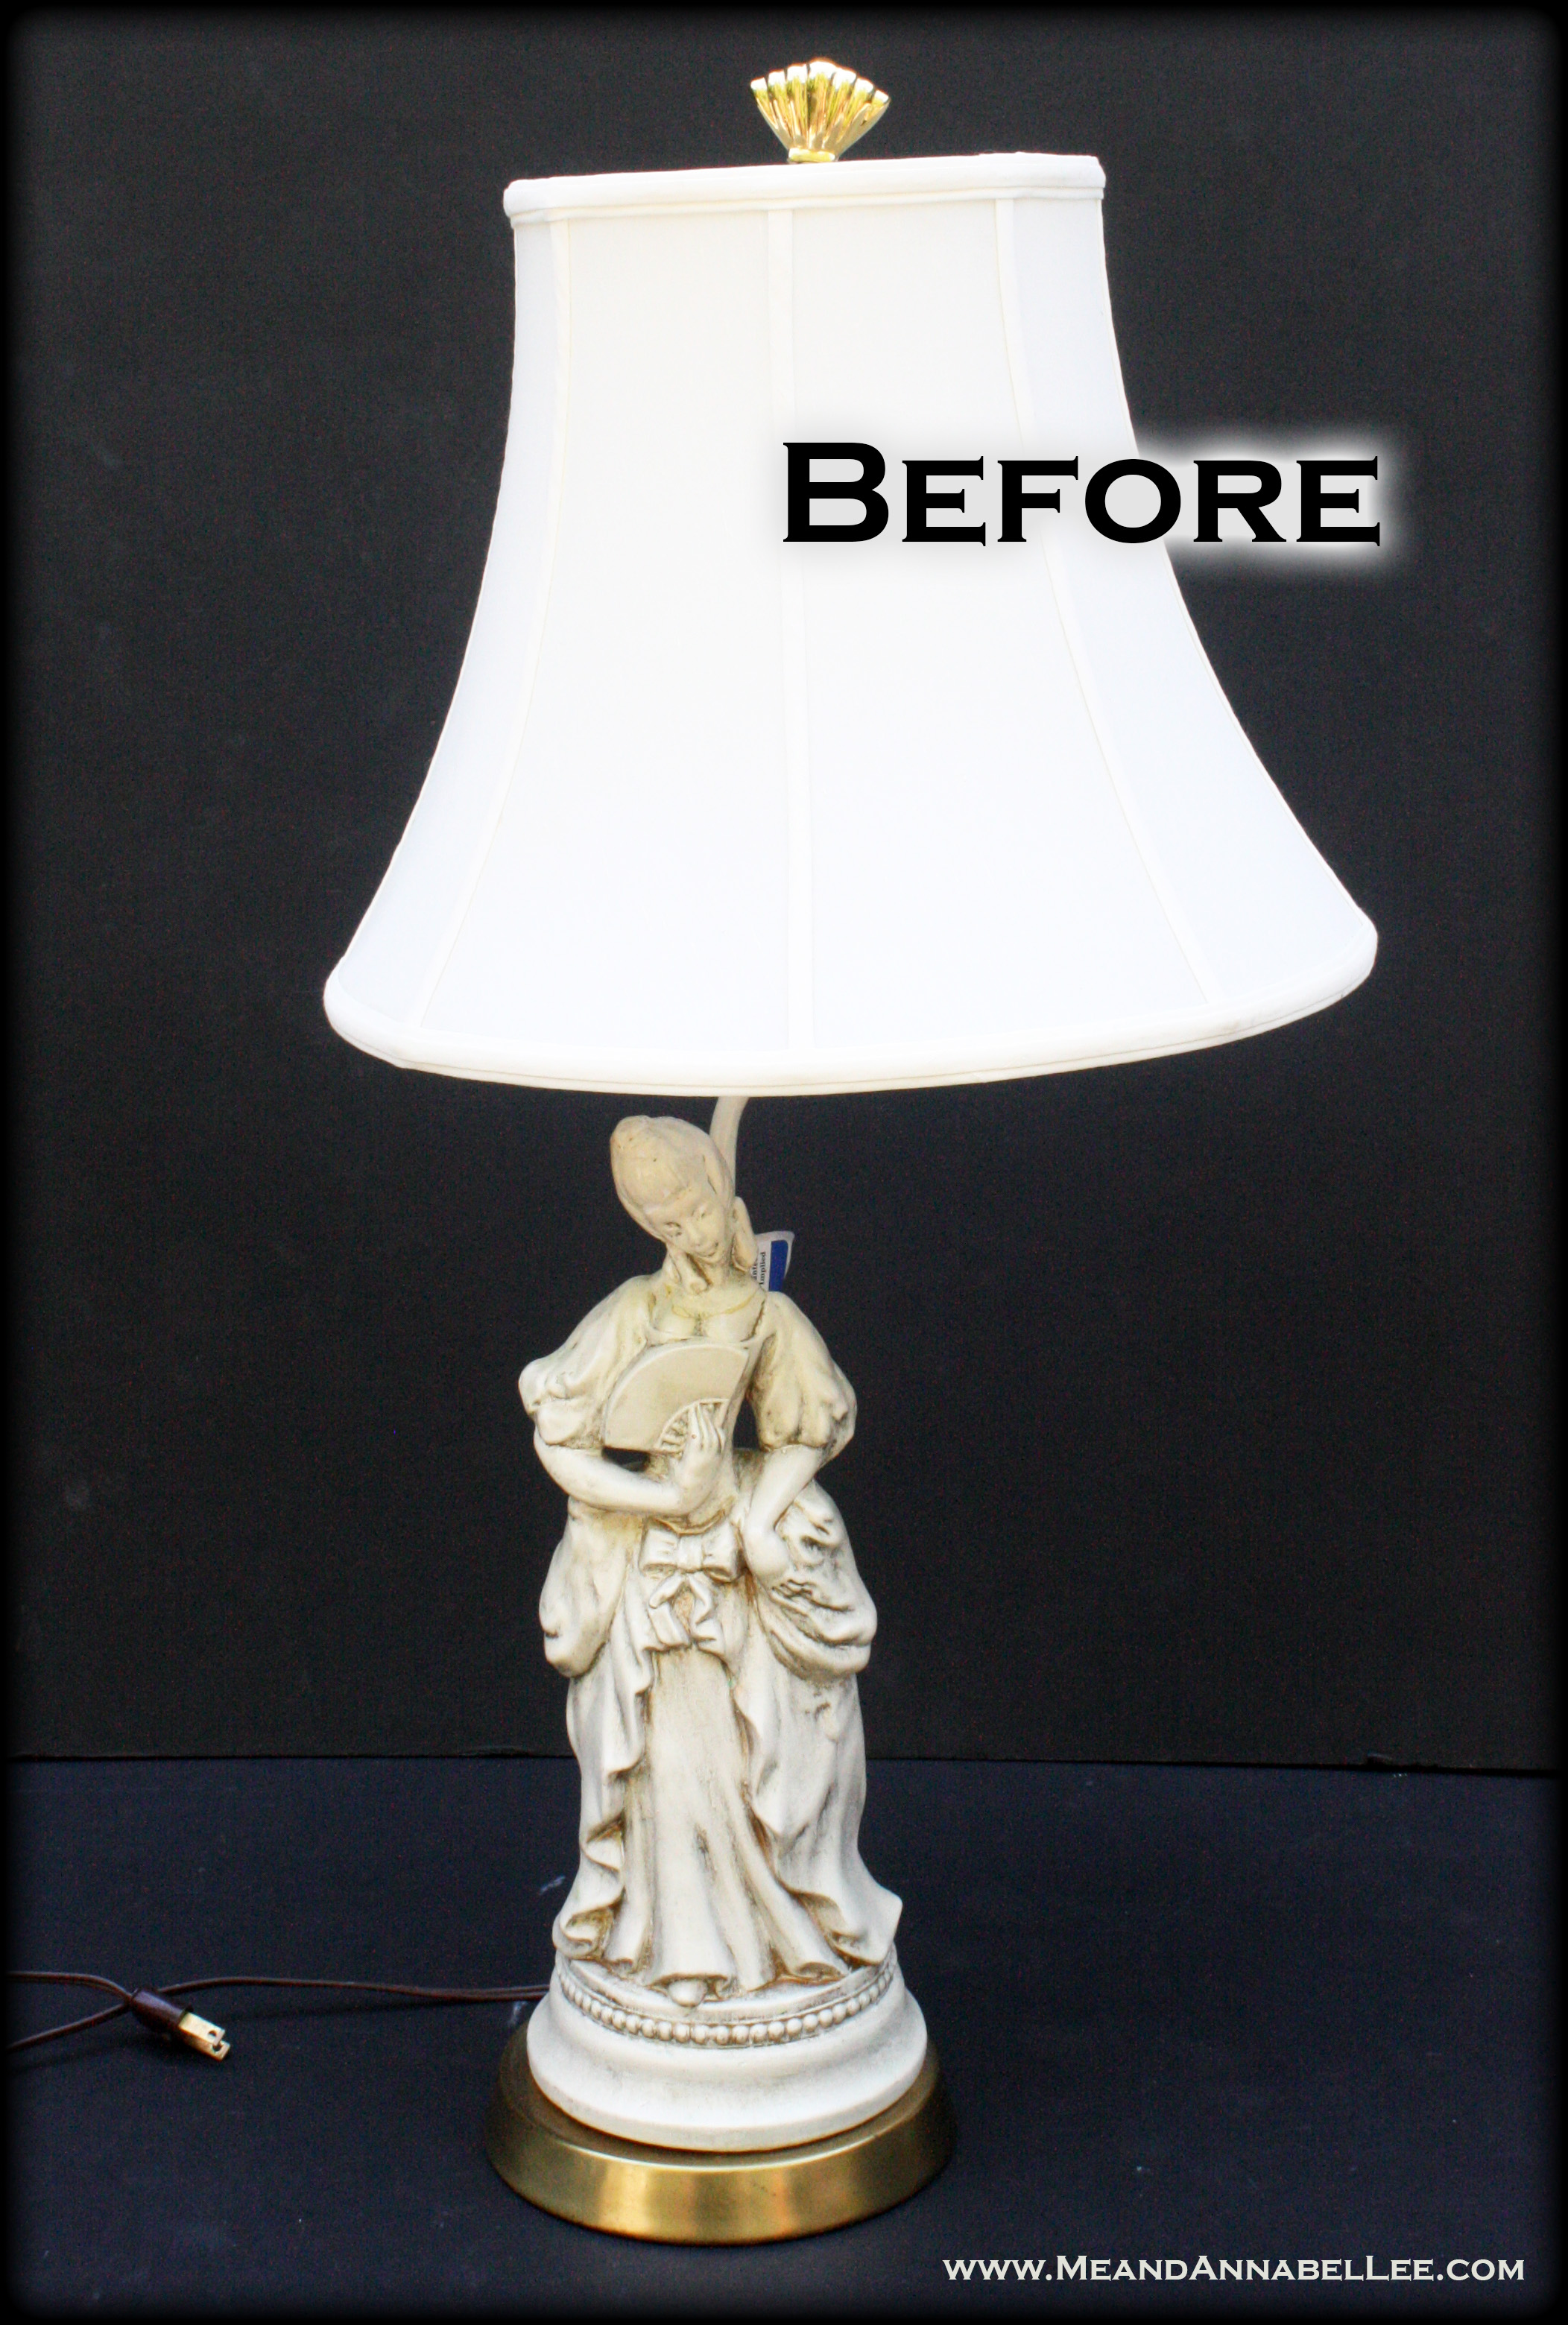 BEFORE - Transform a Victorian Lamp into a Jewelry Stand - www.MeandAnnabelLee.com